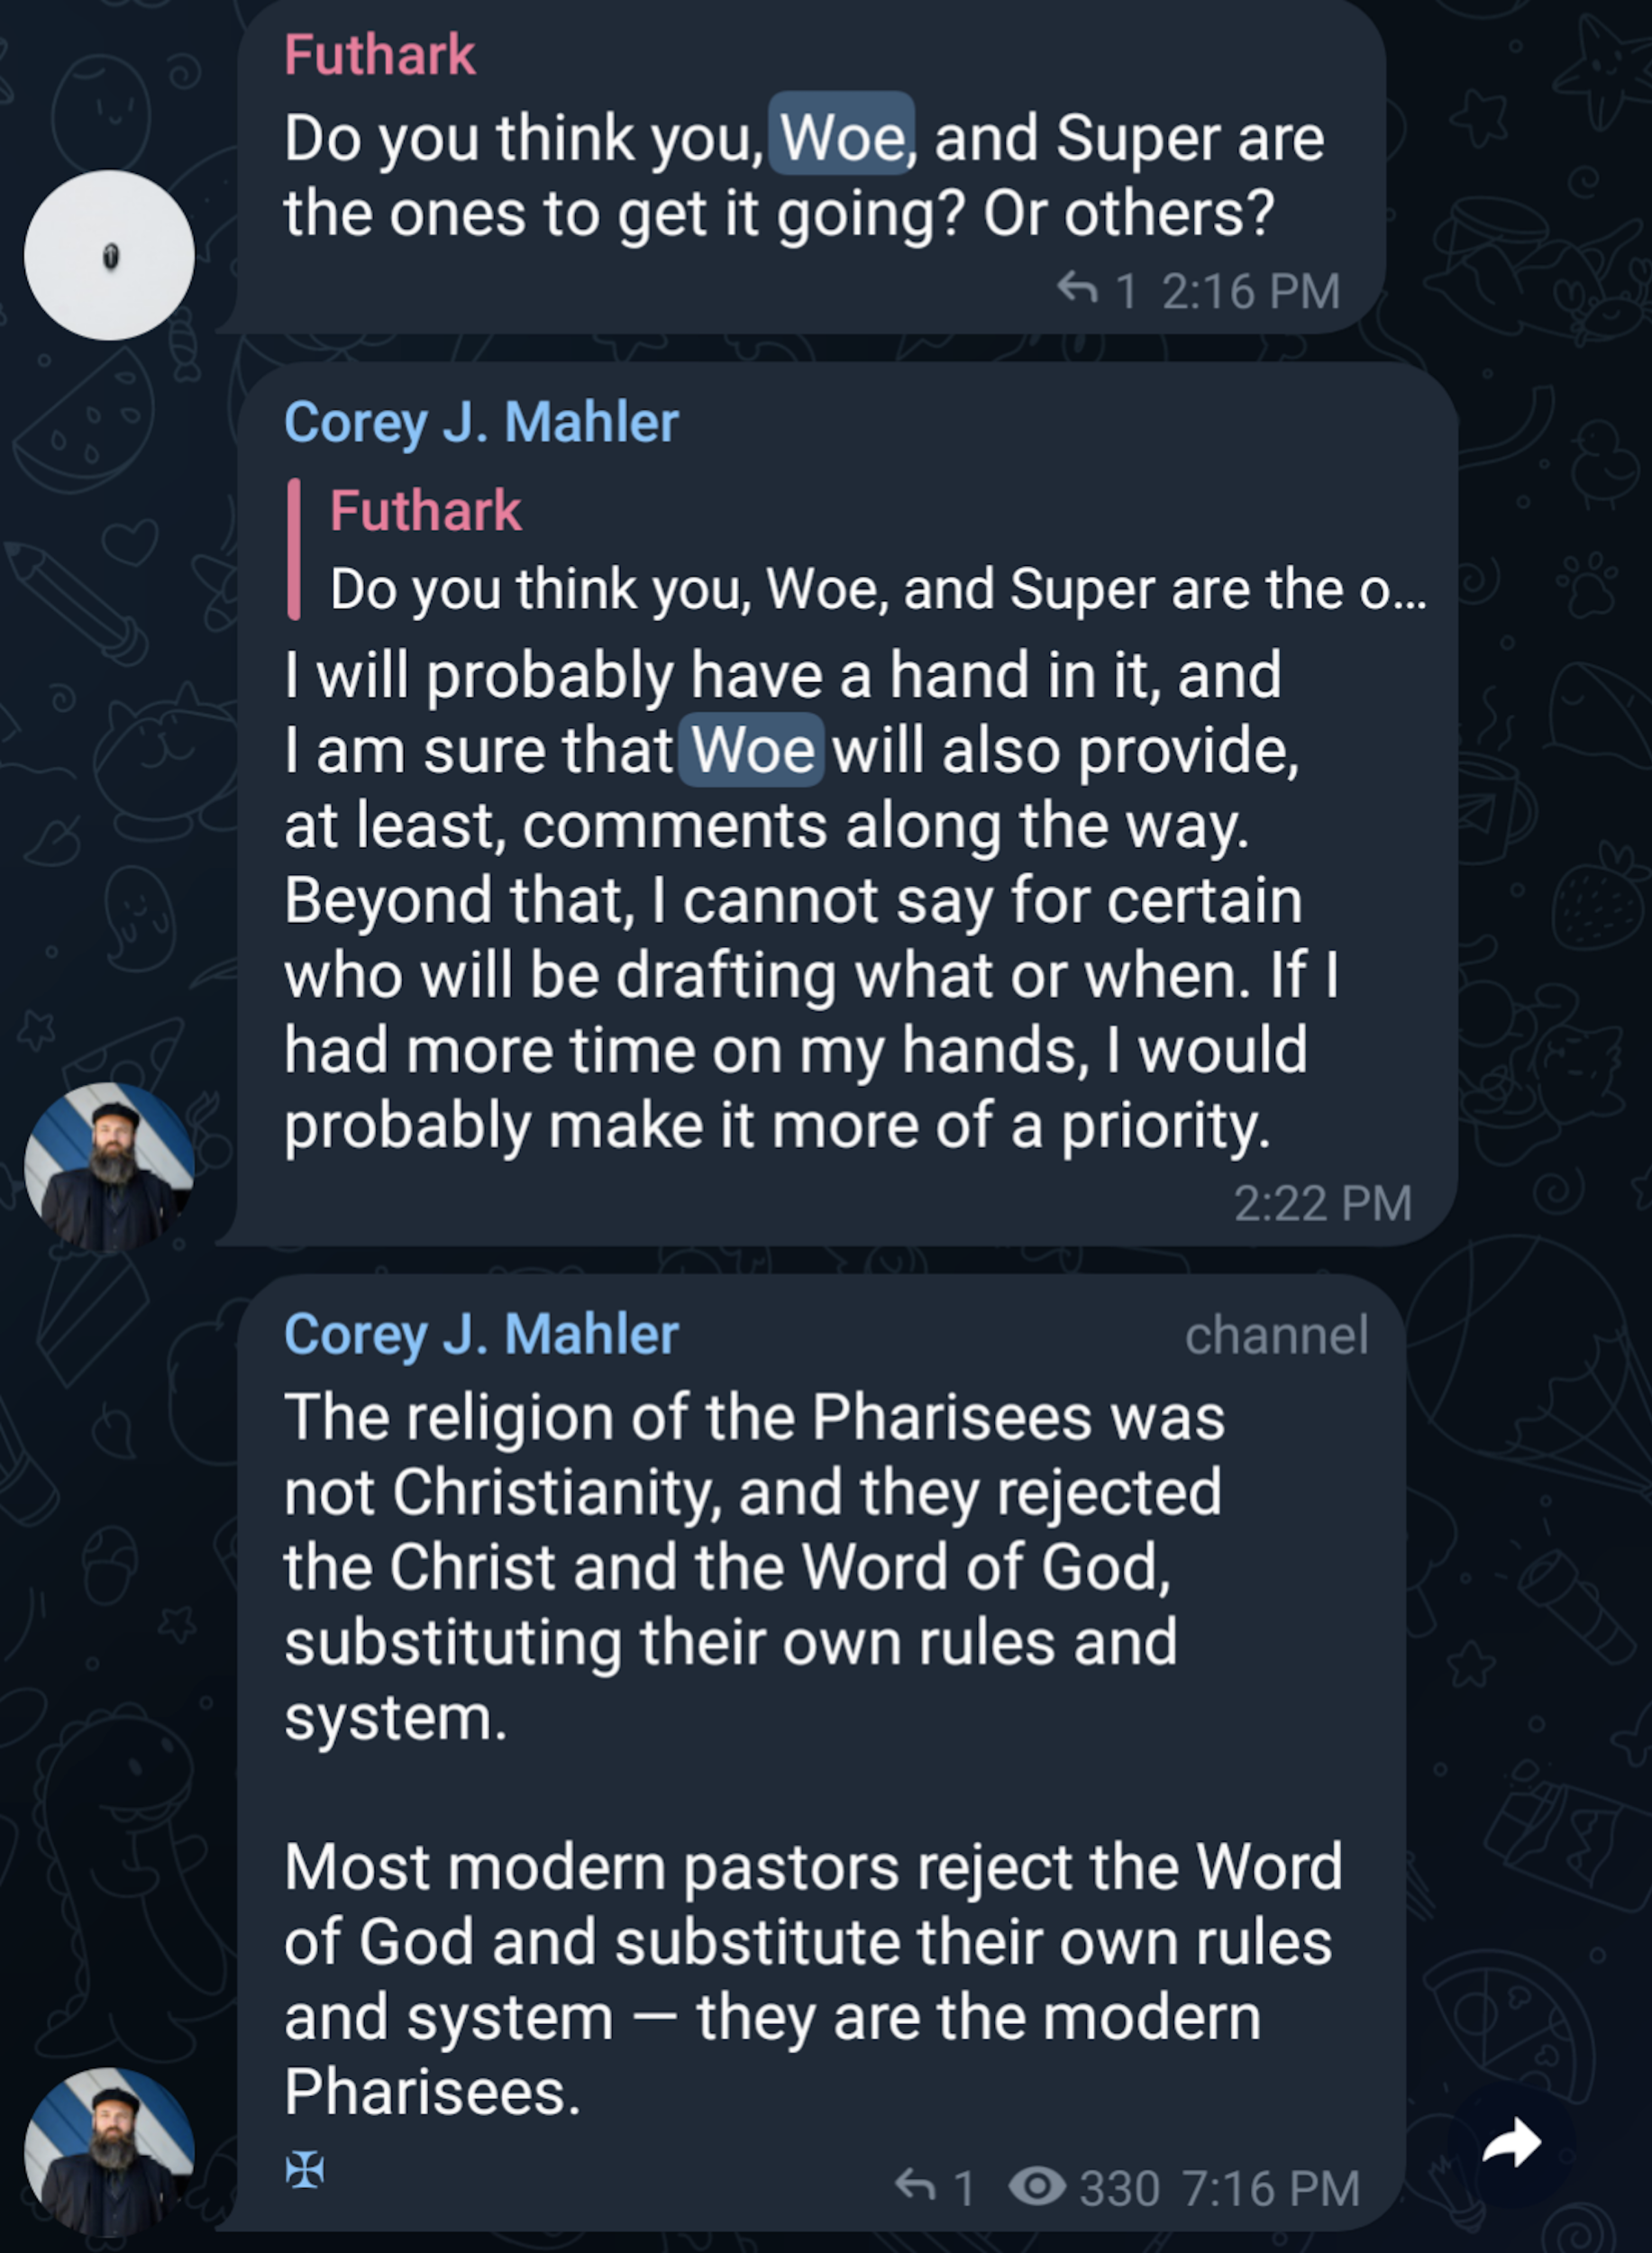 Telegram exchange in which Corey Mahler says that he and Woe will probably be drafting a new Book of Concord that gets away from "the religion of the Pharisees"